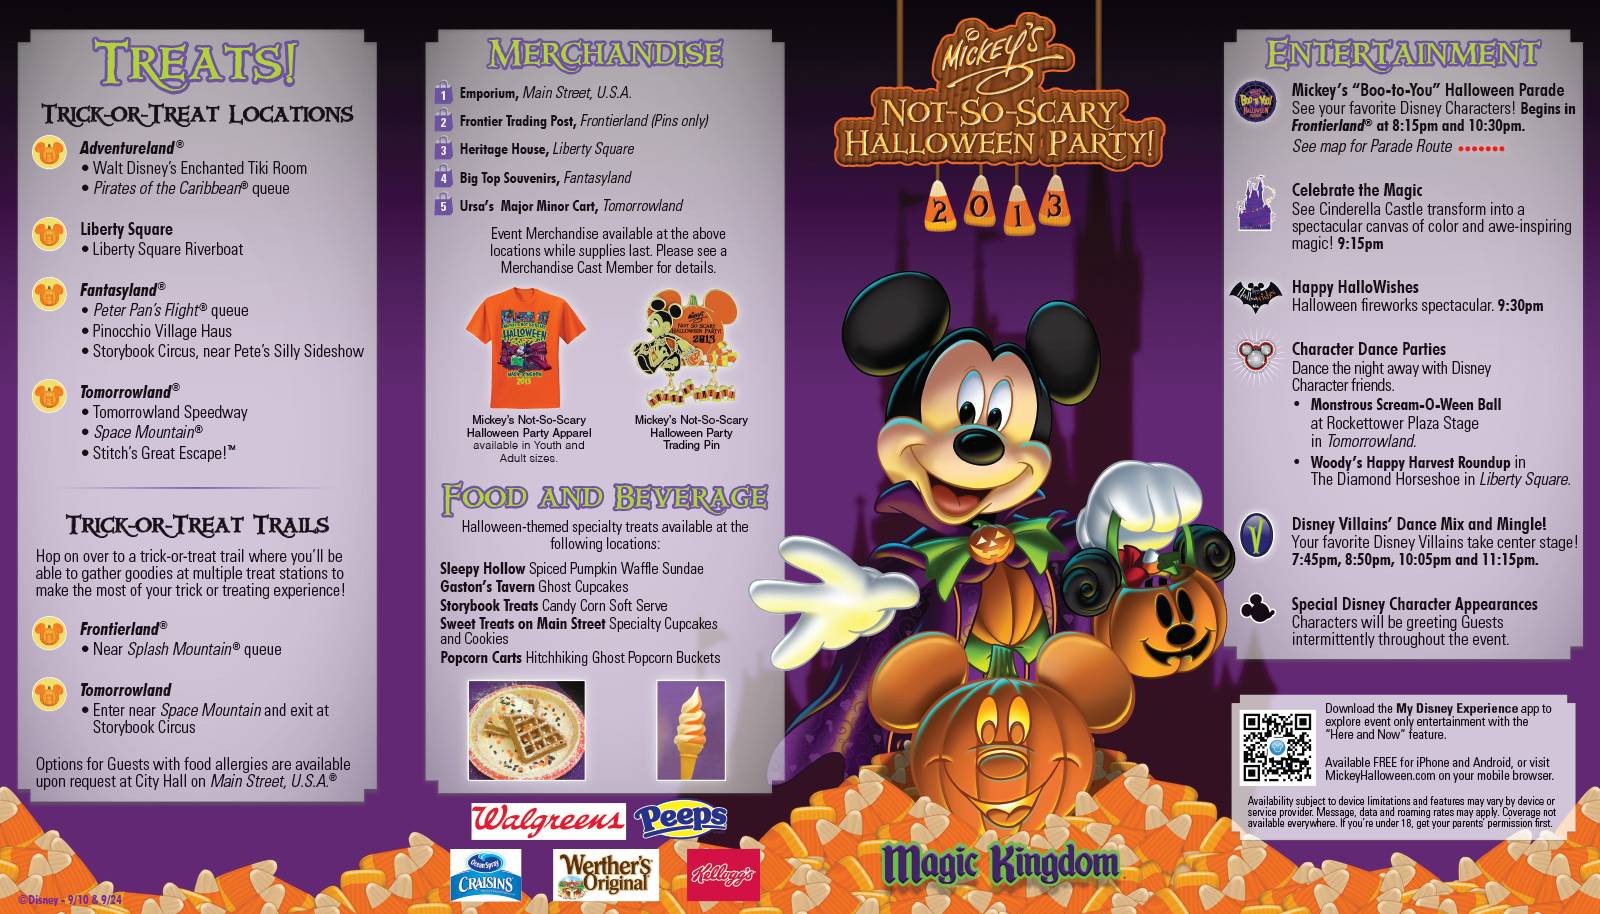 Mickey's Not-So-Scary Halloween Party guide map and schedule now available